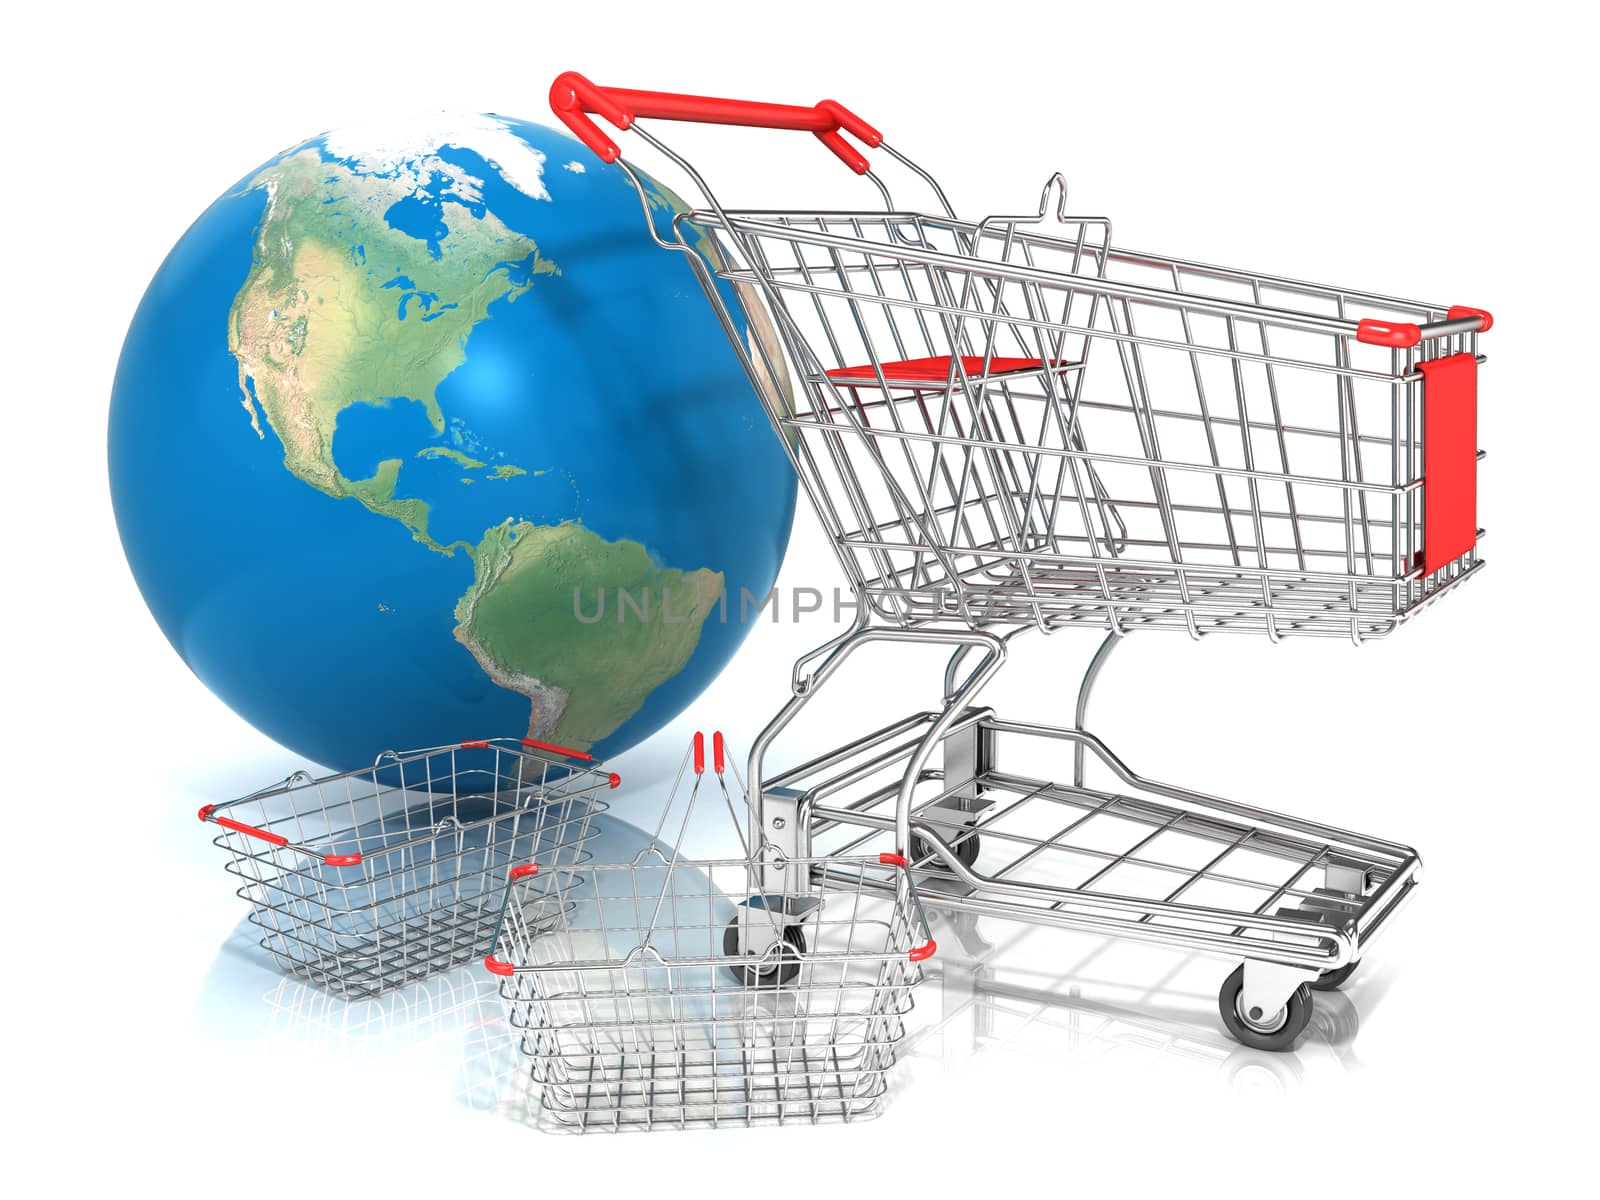 Steel wire shopping baskets and shopping cart in front of globe, isolated on a white background. Elements of this image furnished by NASA